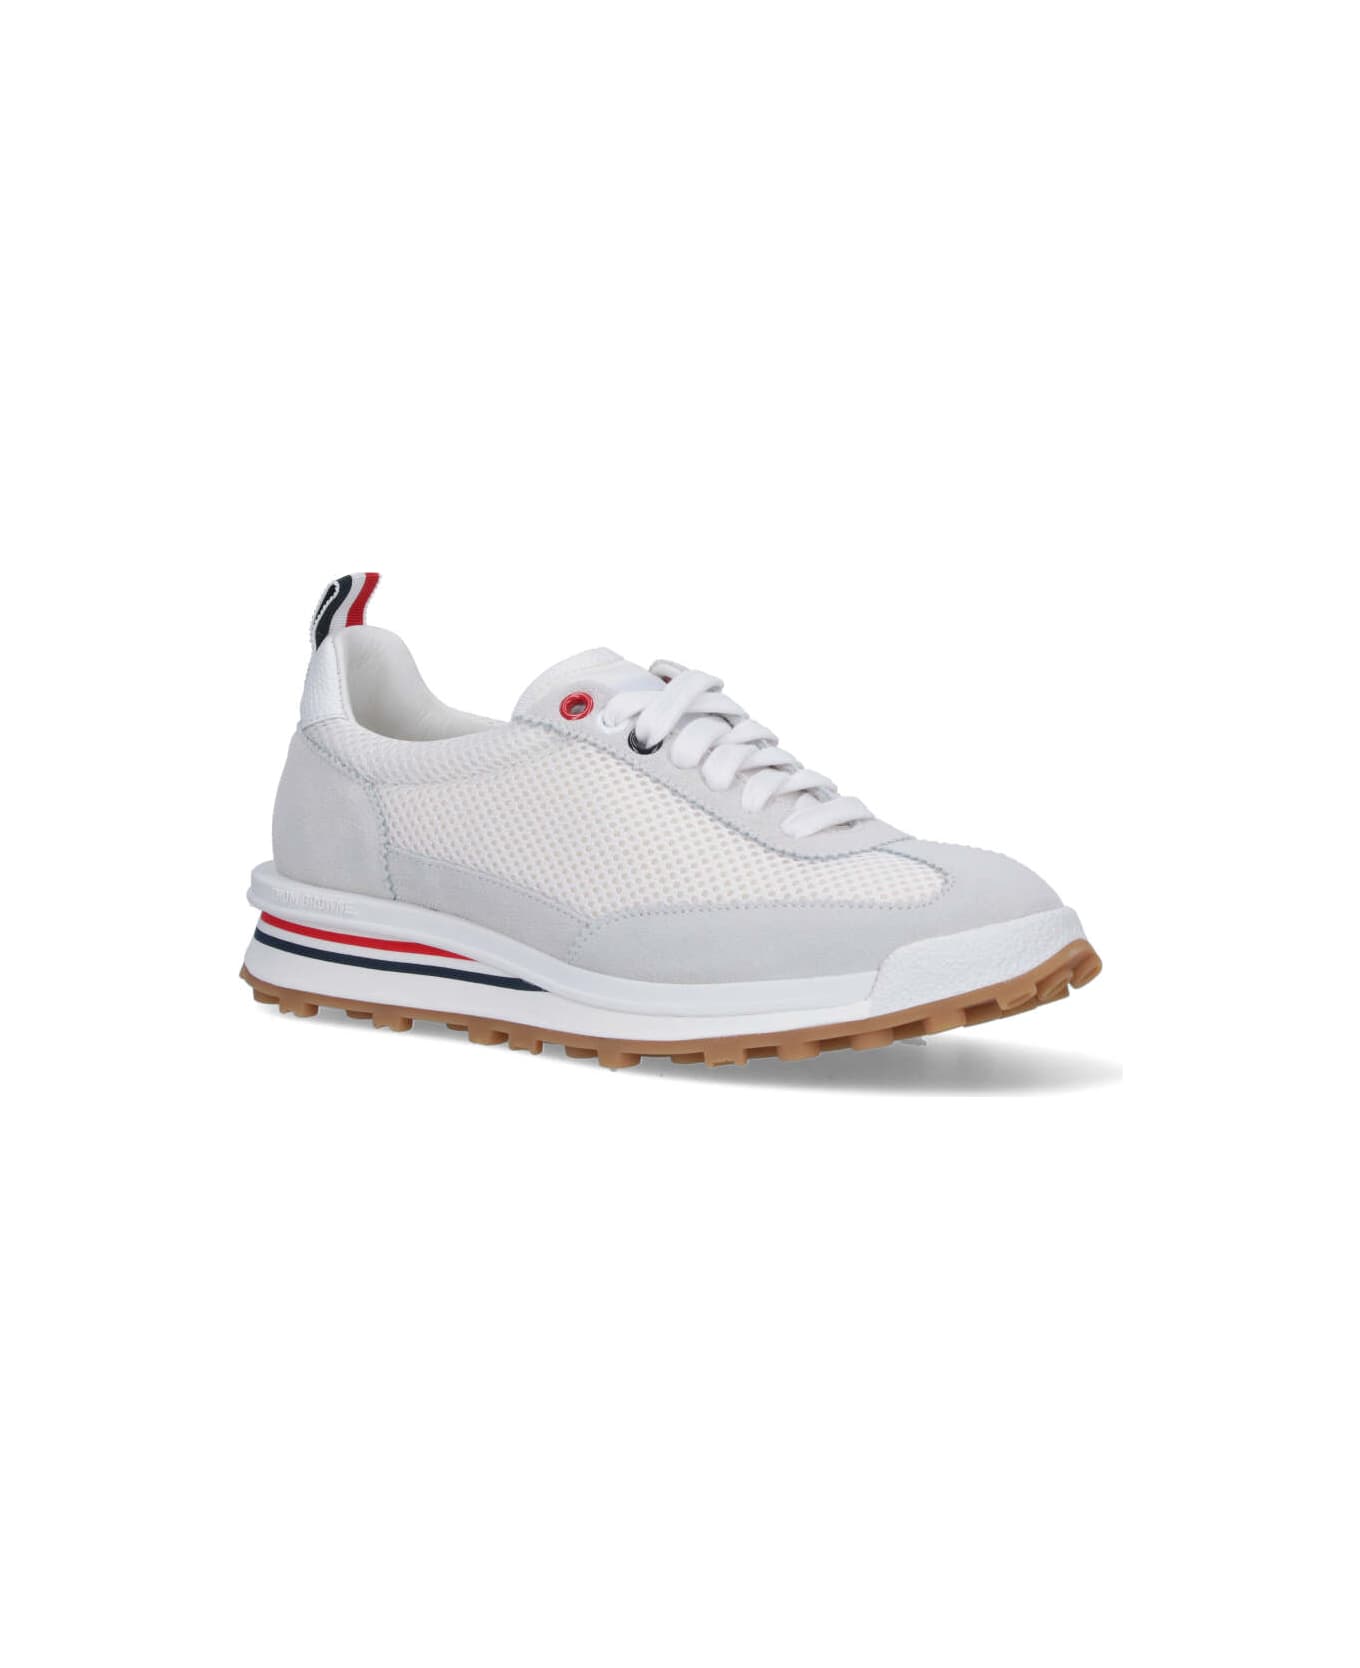 Thom Browne 'tech Runner' Sneakers - WHITE